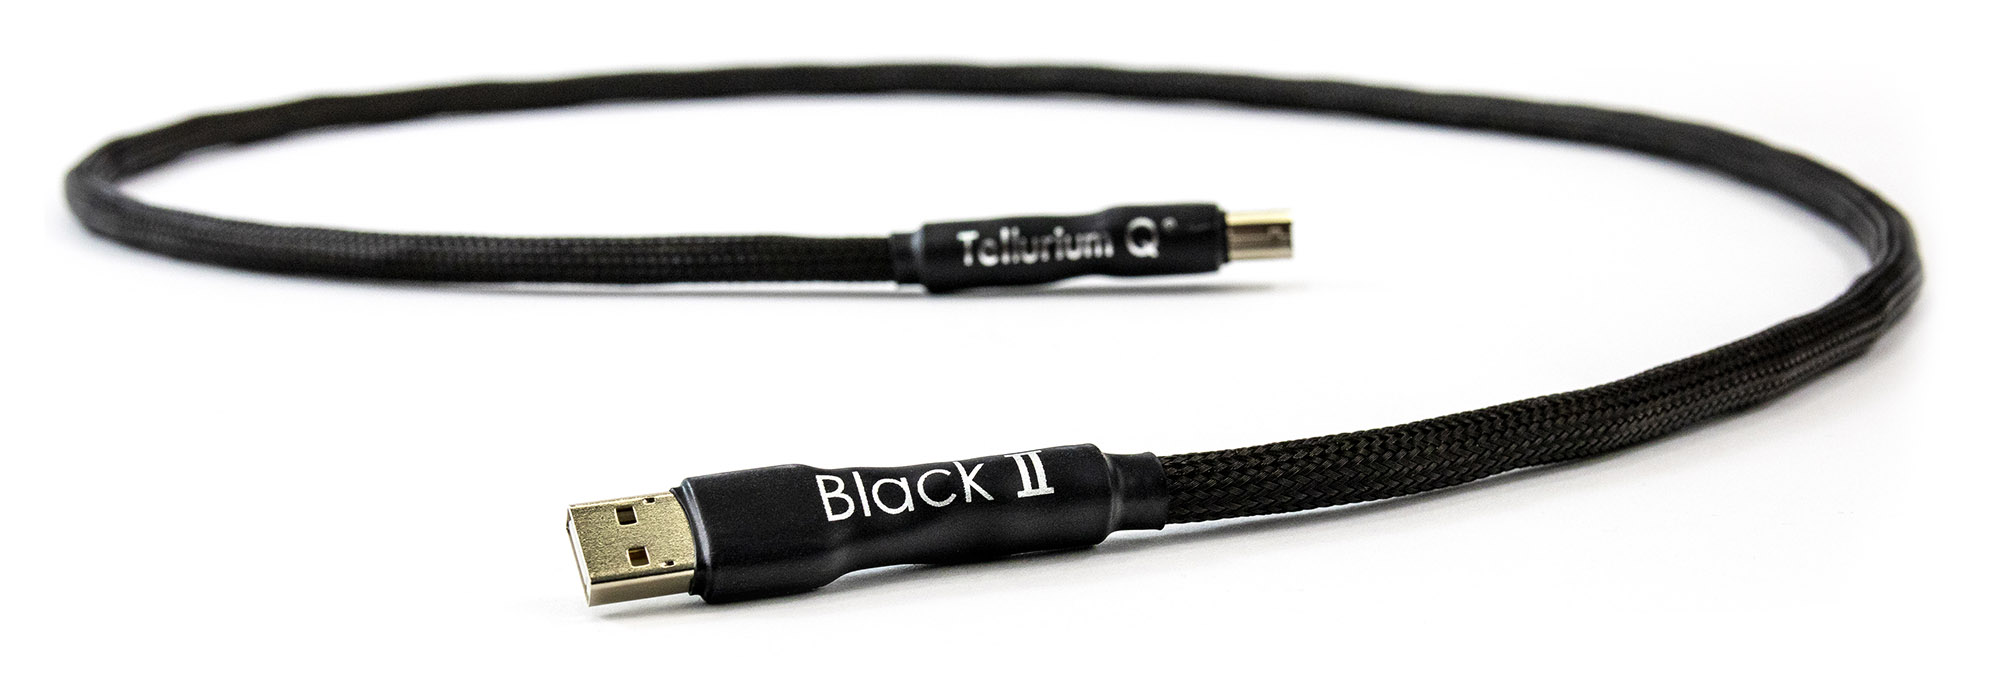 Featured image for “Black II USB”